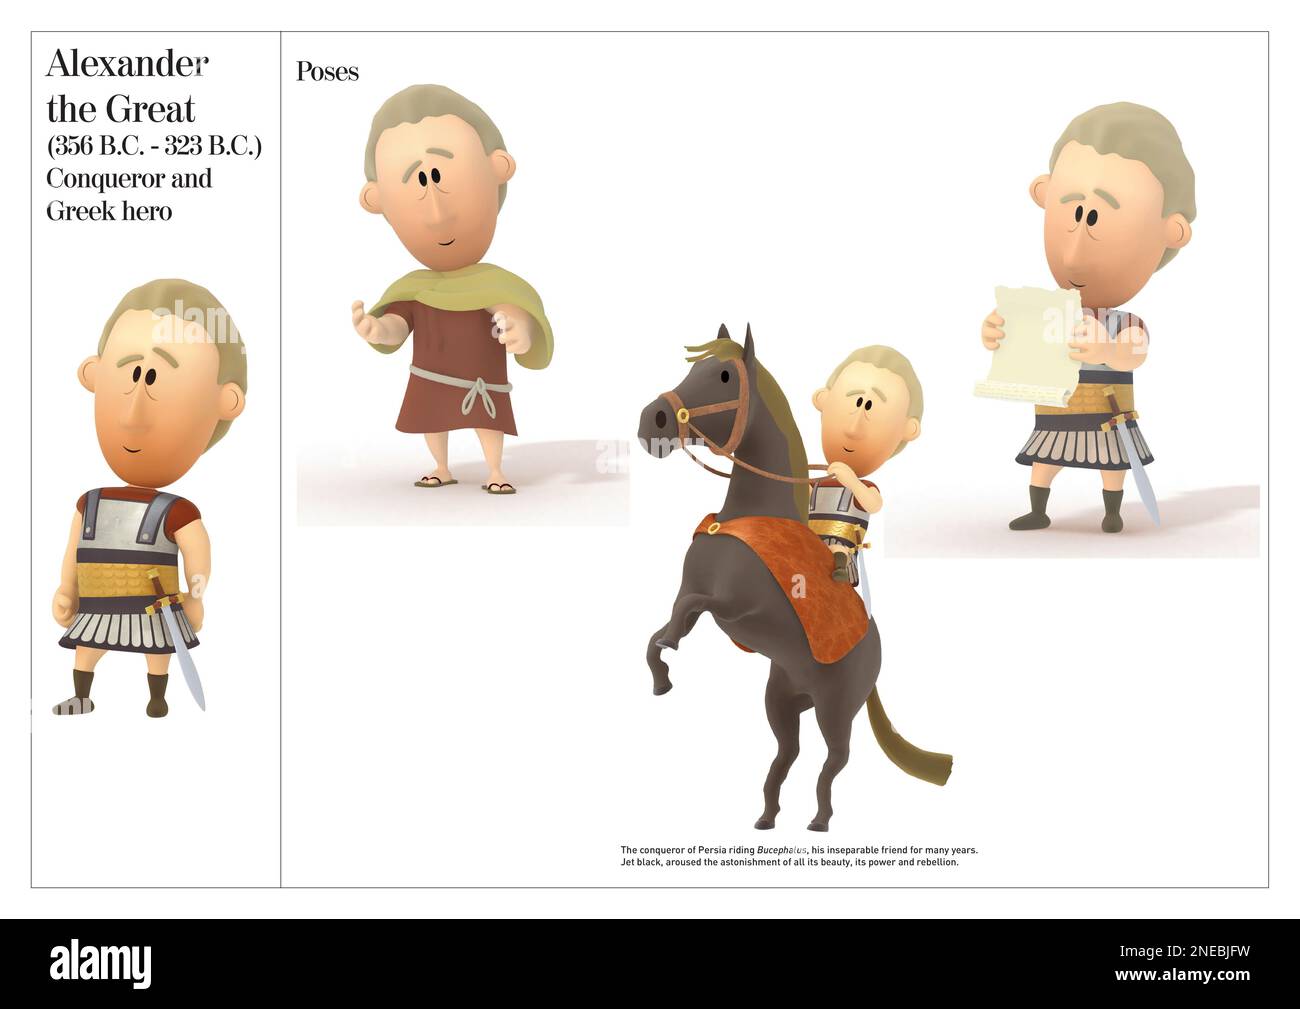 Postural pictures of Alexander the Great, Greek conqueror and heroe, (356 B.C.-323 B.C.). [Adobe InDesign (.indd)]. Stock Photo